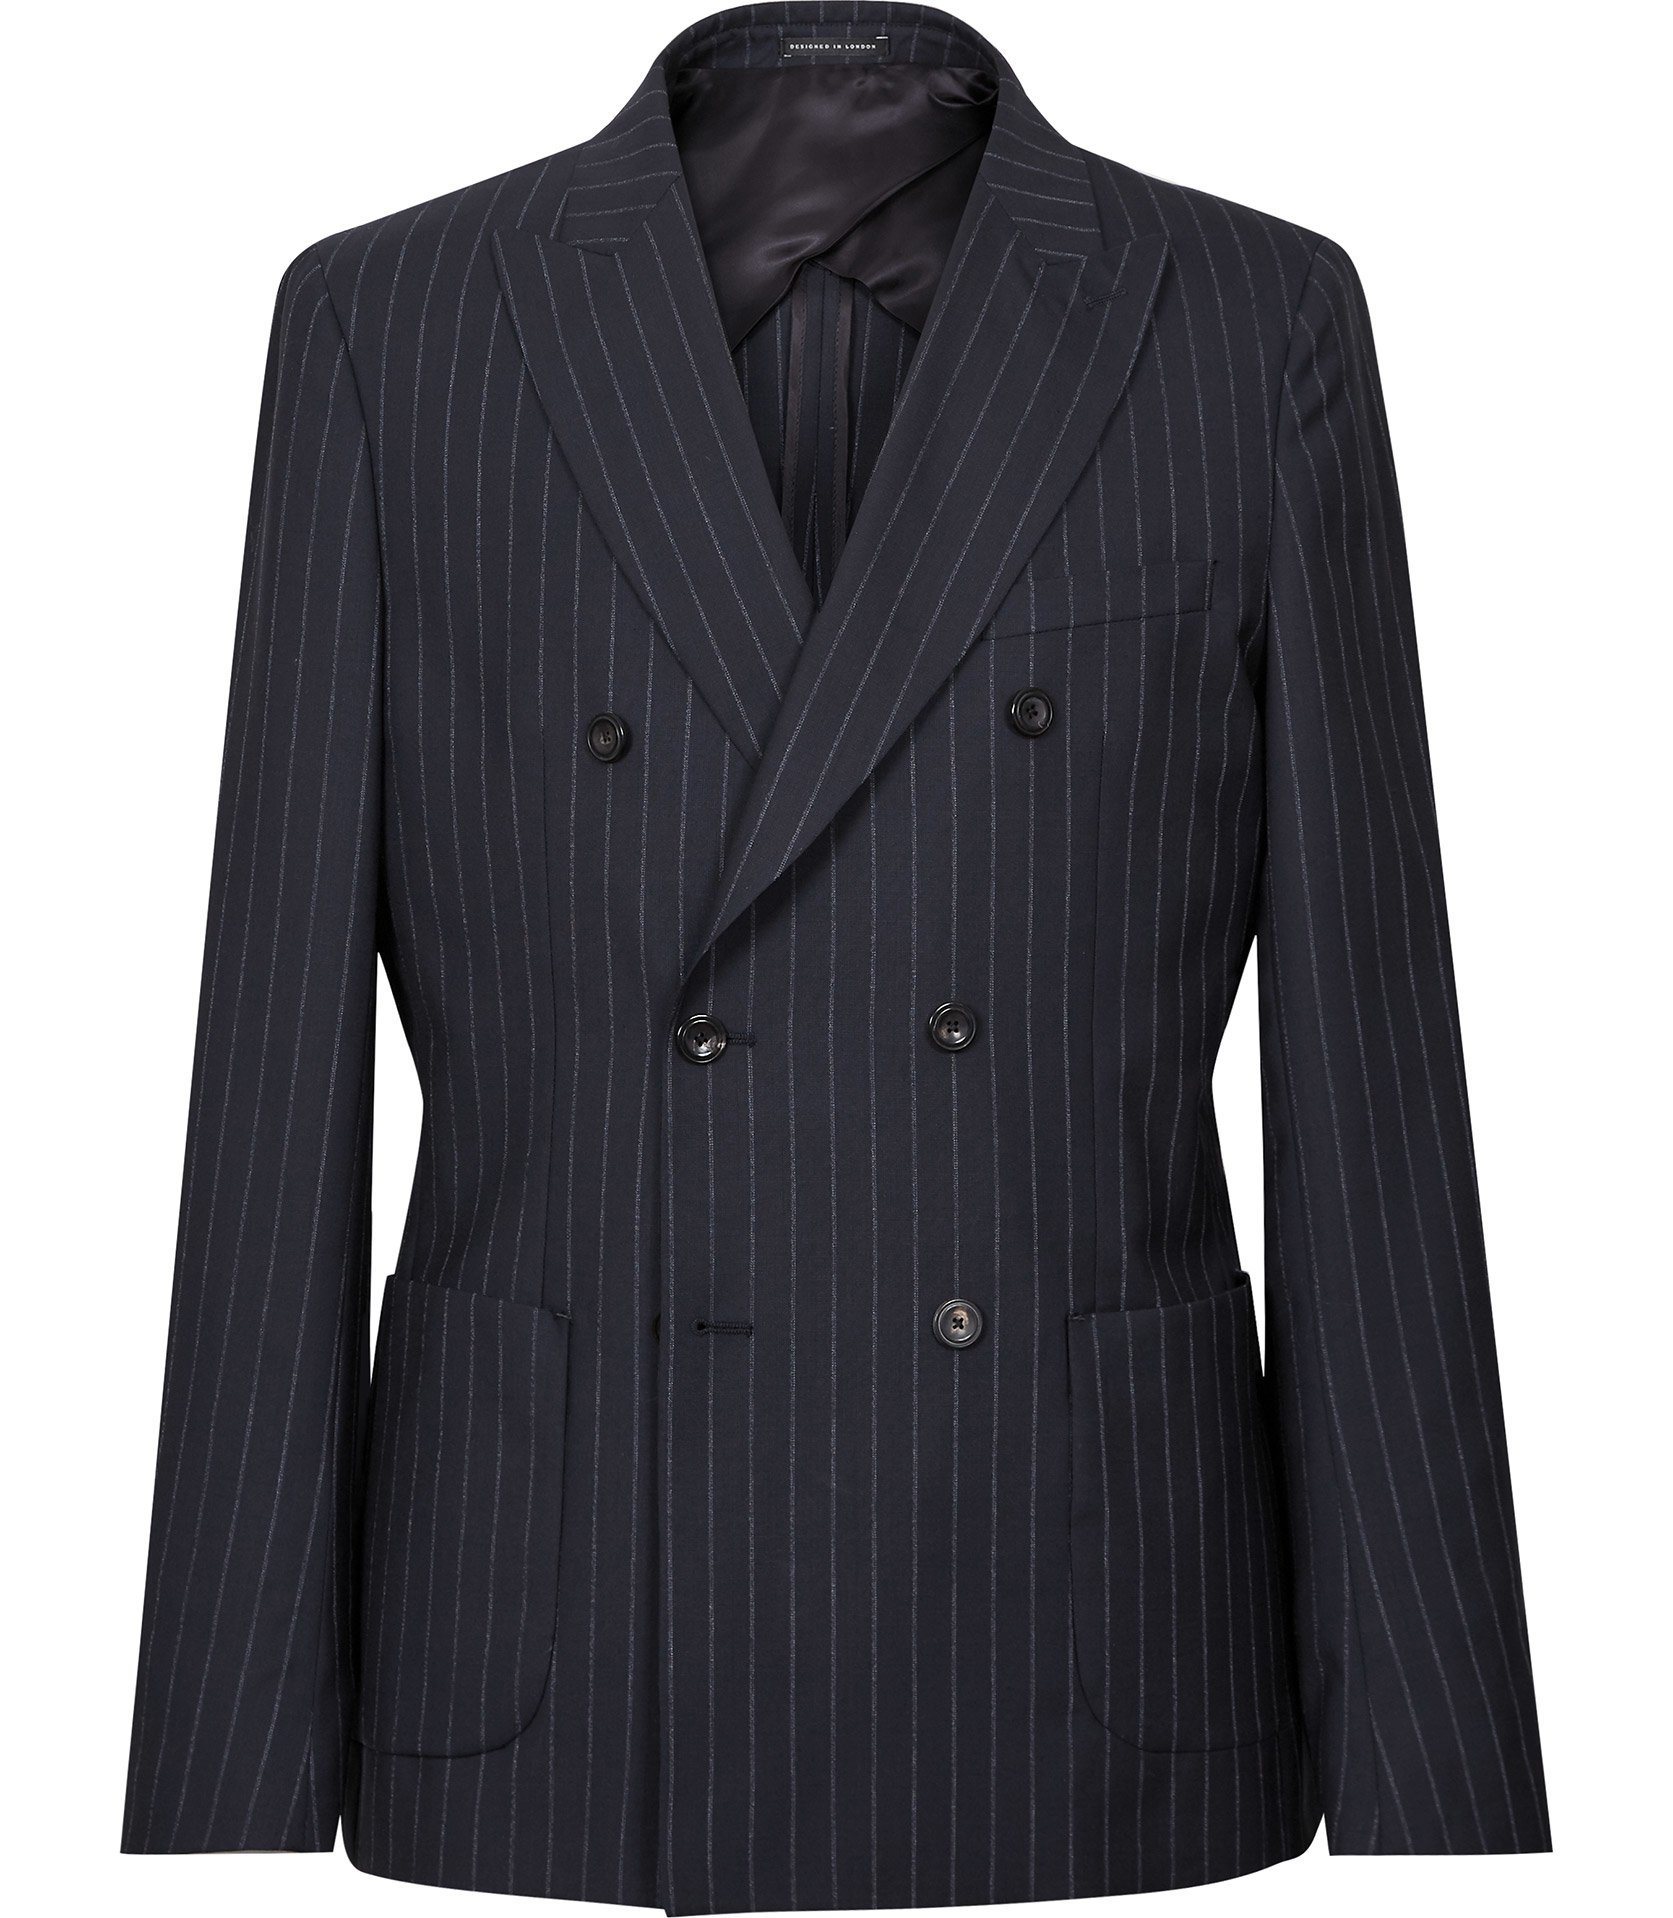 Reiss Navy Double-Breasted Blazer